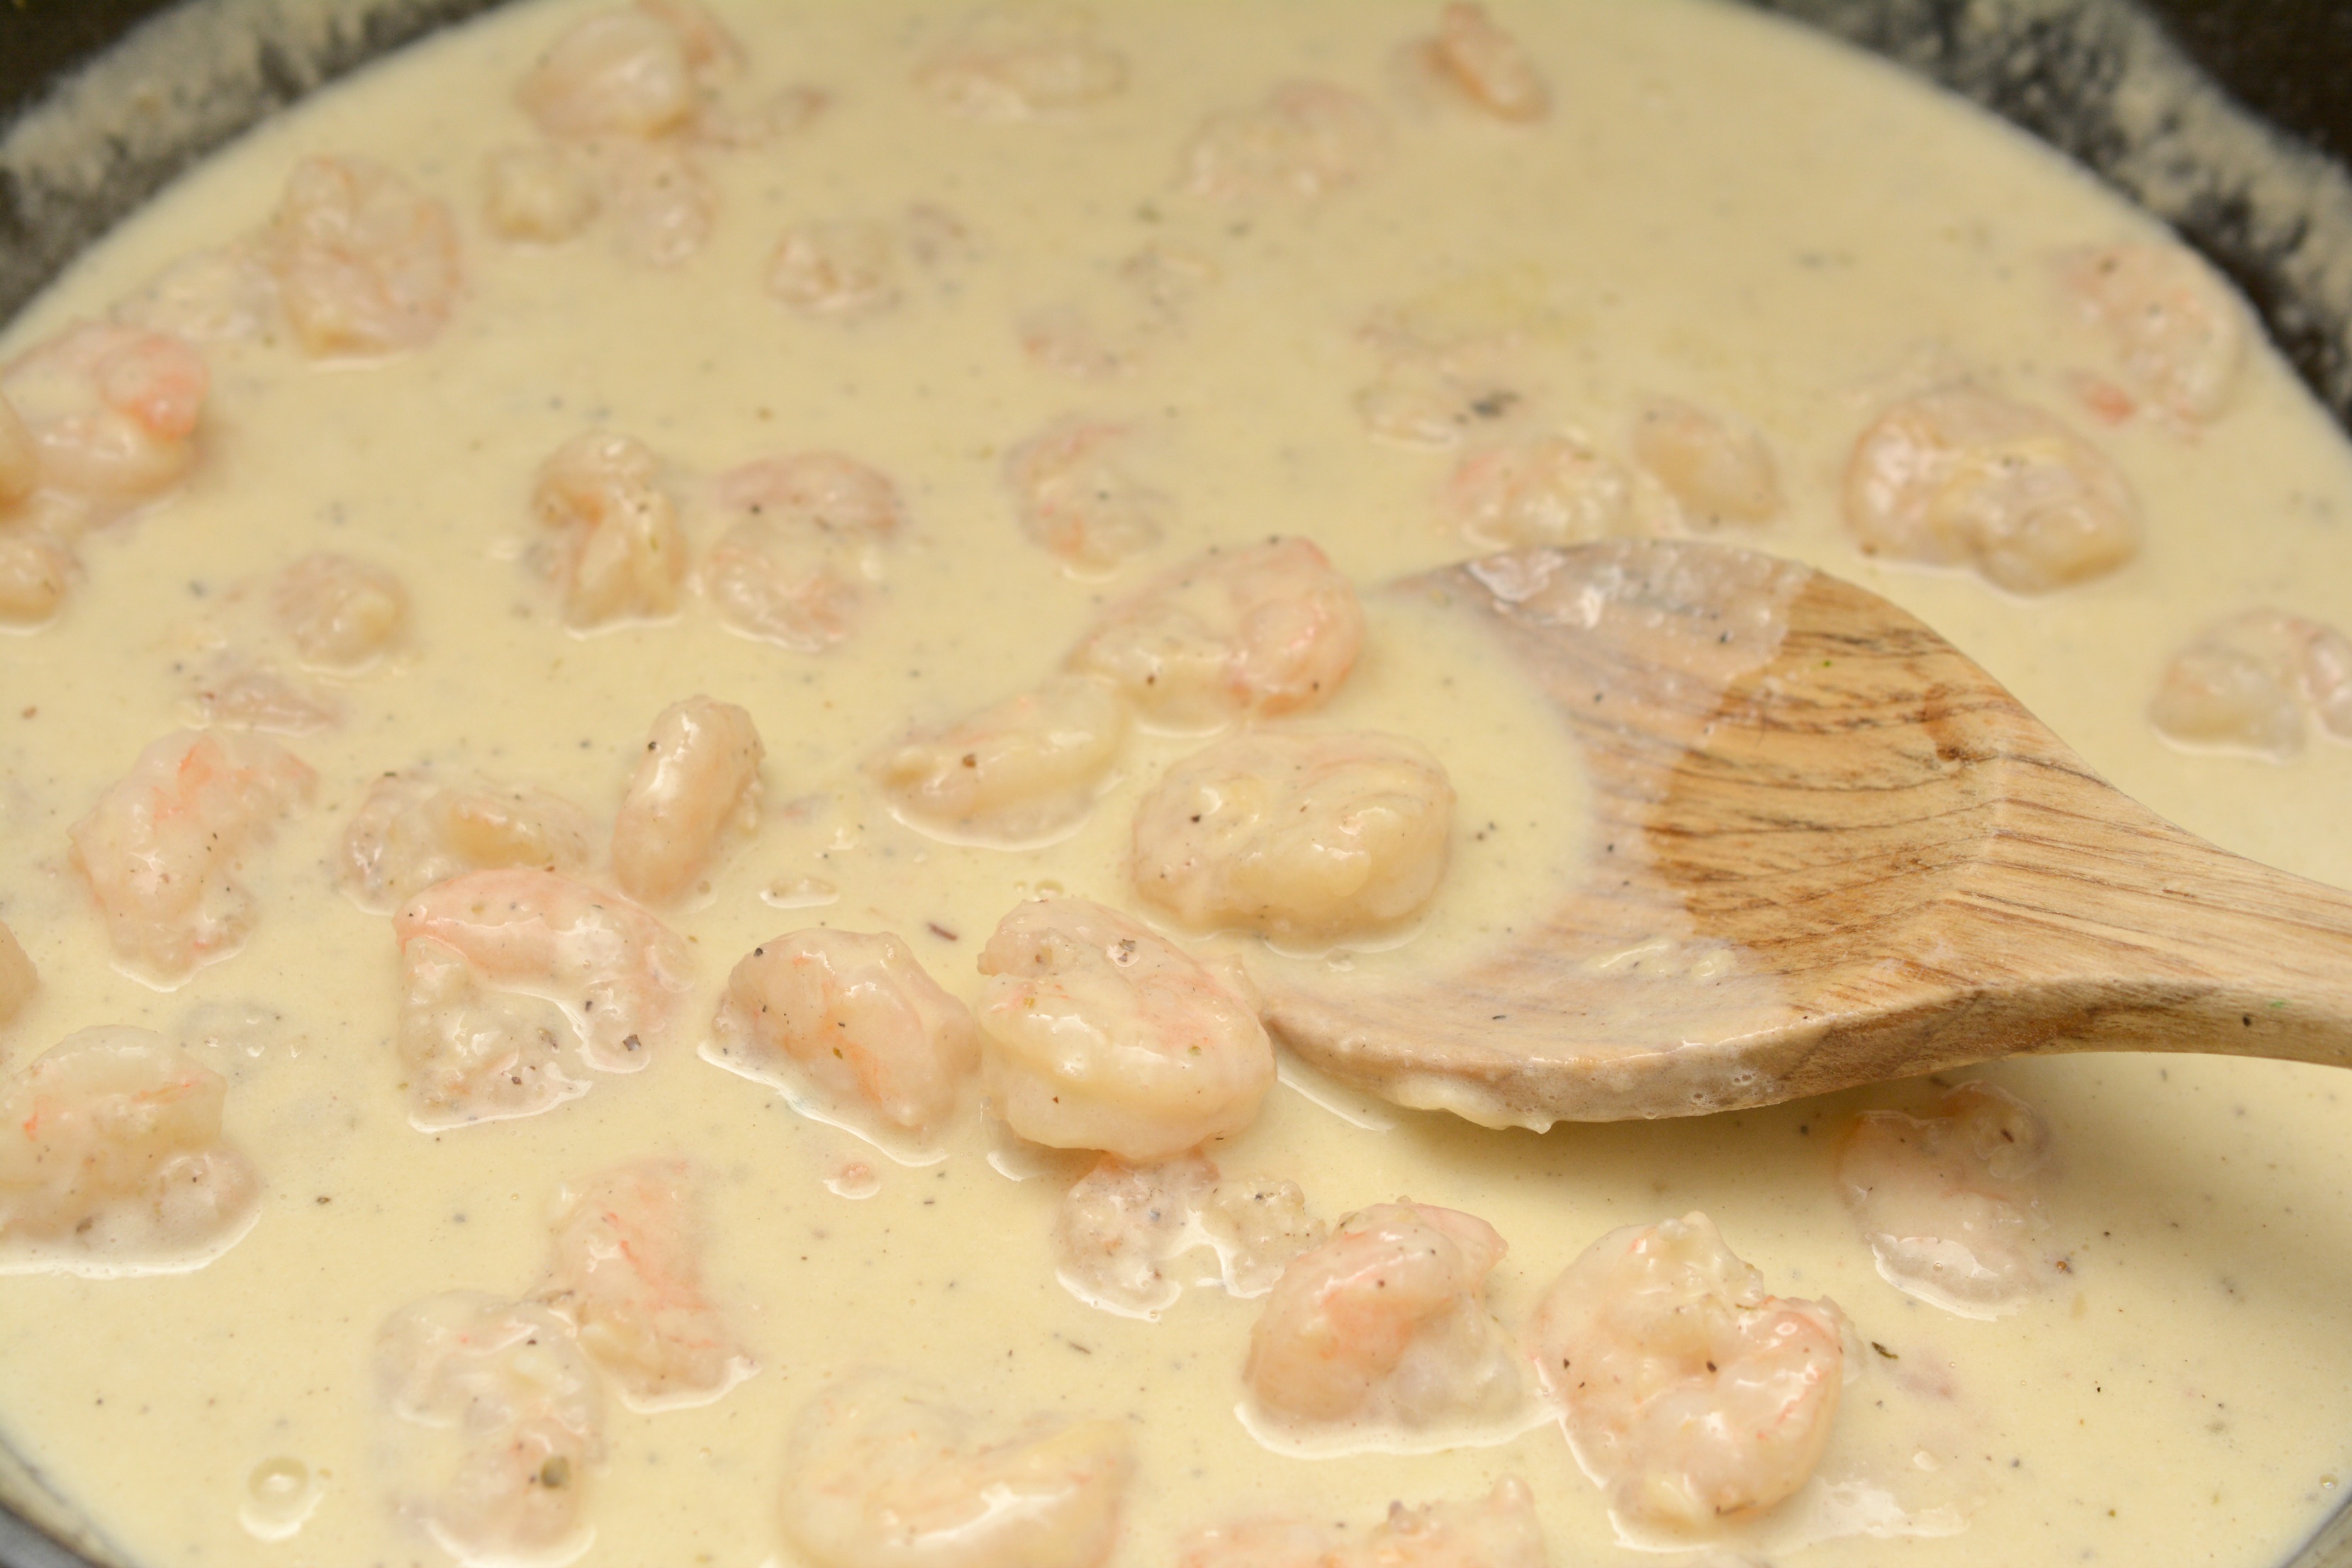 Love alfredo sauce? Want a low carb alfredo sauce? This keto-friendly Shrimp Alfredo is a delicious version of the original that won't ruin your new healthier lifestyle. You won't miss anything but the carbs with this recipe. 